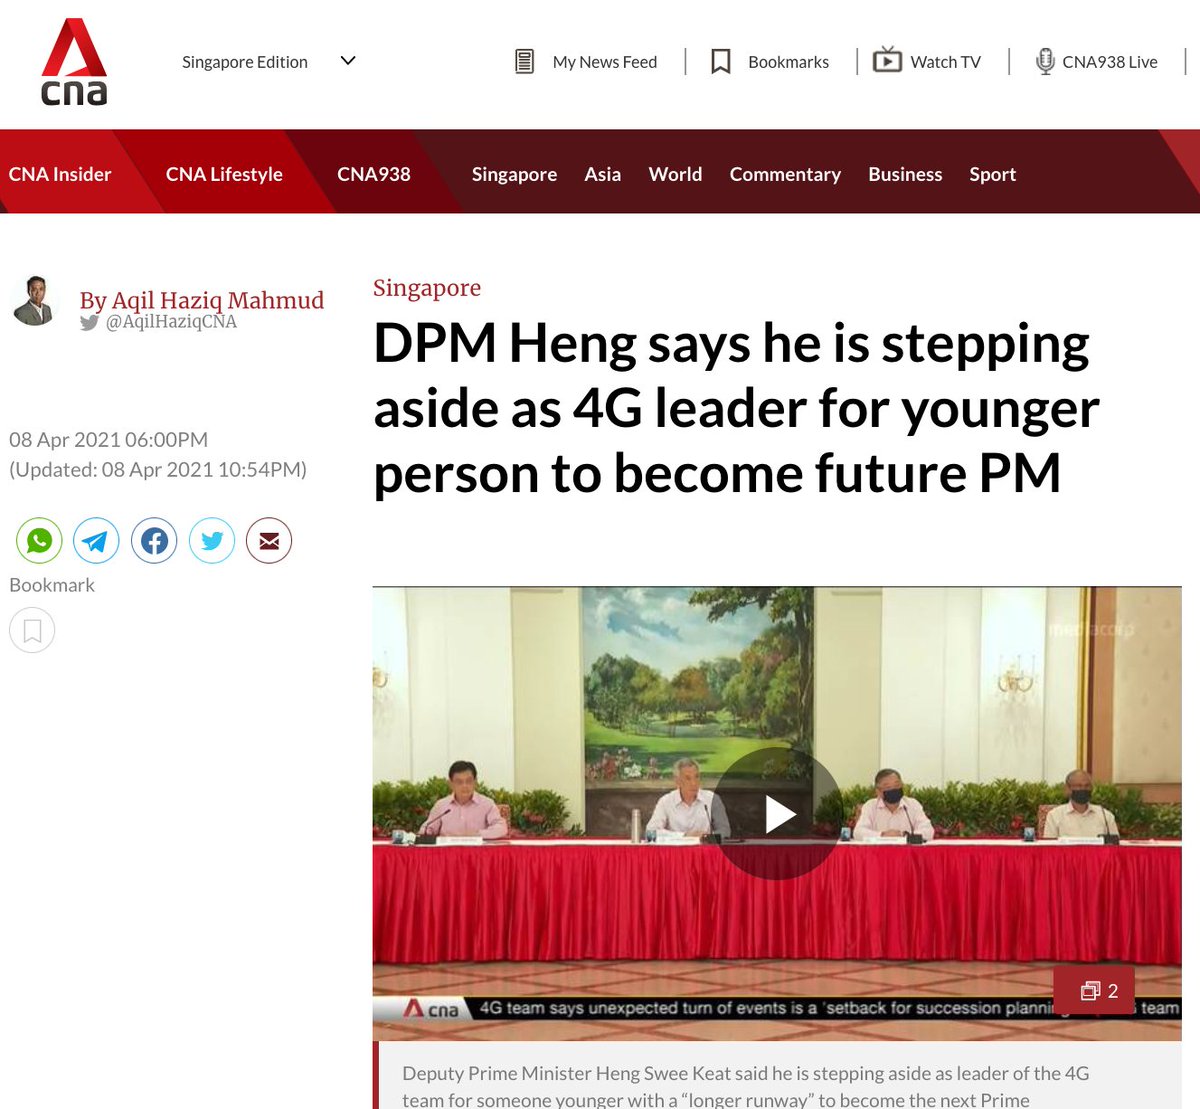 Yesterday, Singapore's Deputy Prime Minister Heng Swee Keat, the designated "PM in Waiting" to take over current PM Lee Hsien Loong, made the decision to "step aside" in favour of someone younger. How can poli sci research help us make sense of it?  https://bit.ly/3d31S81 